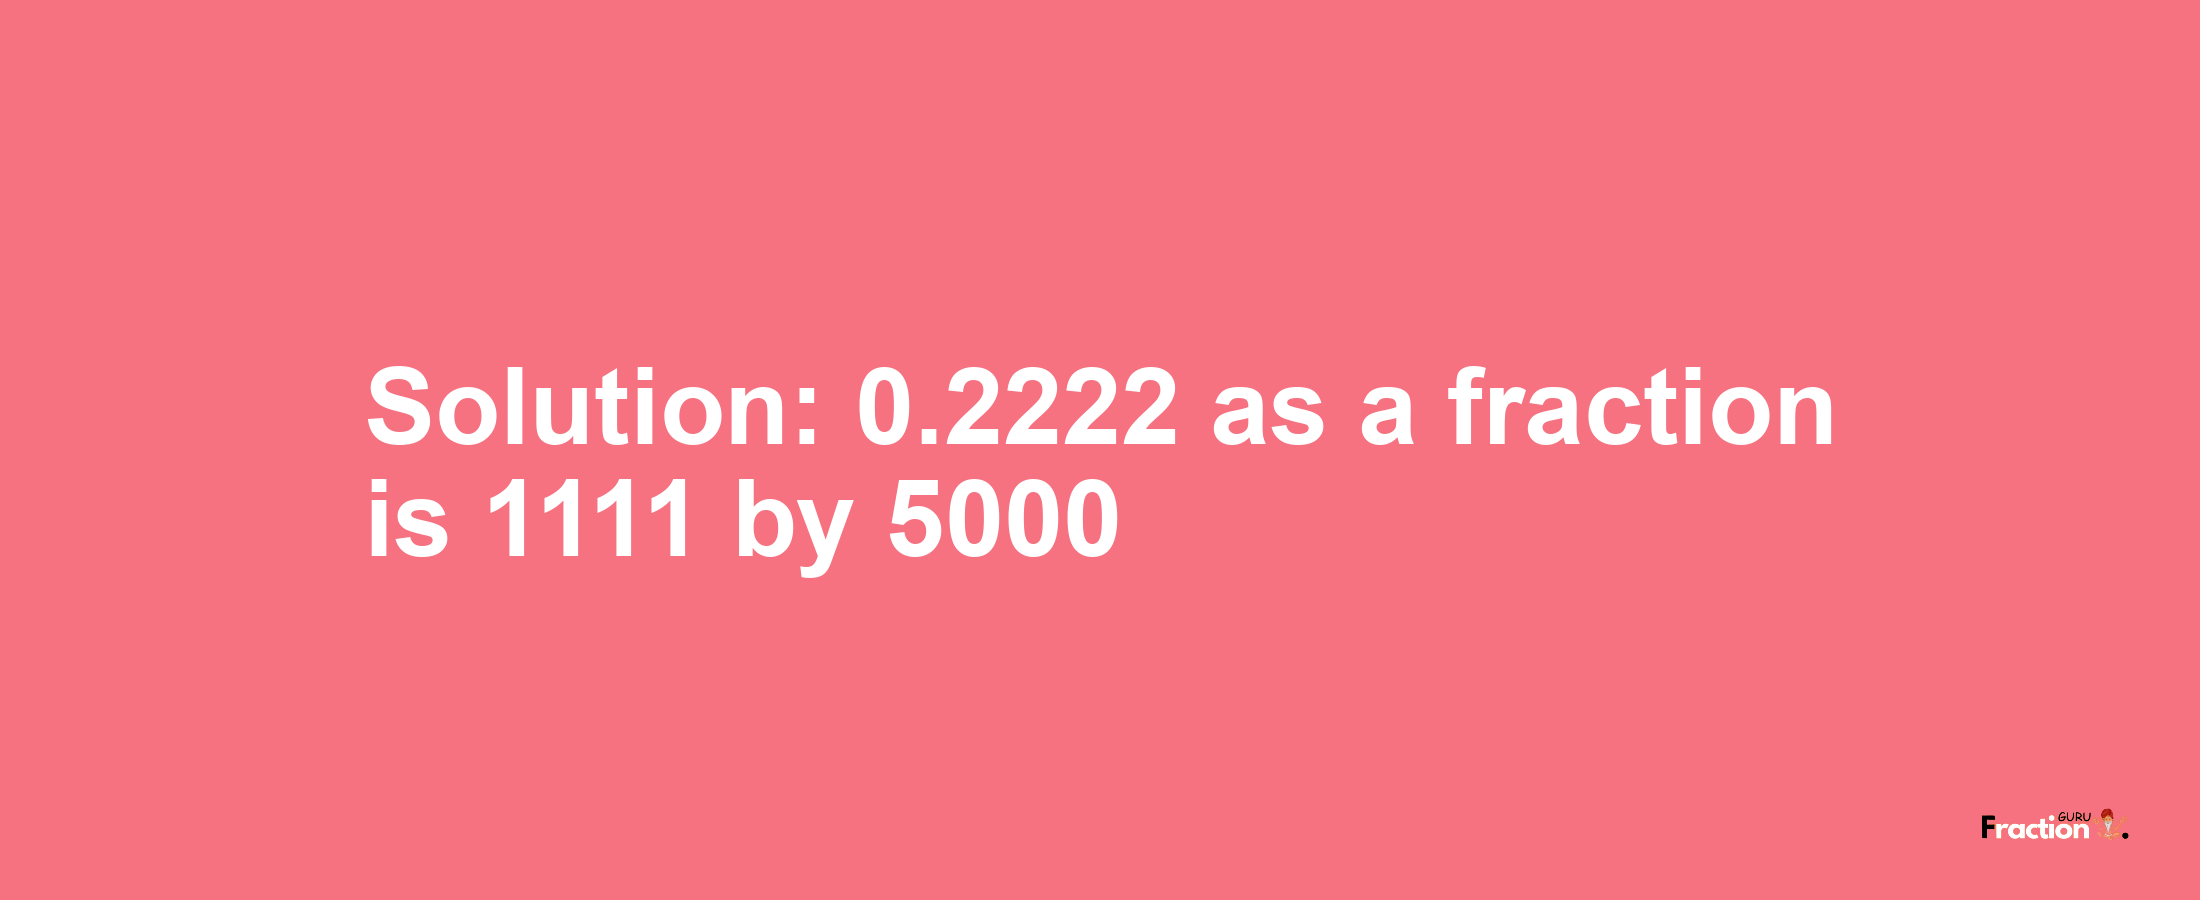 Solution:0.2222 as a fraction is 1111/5000